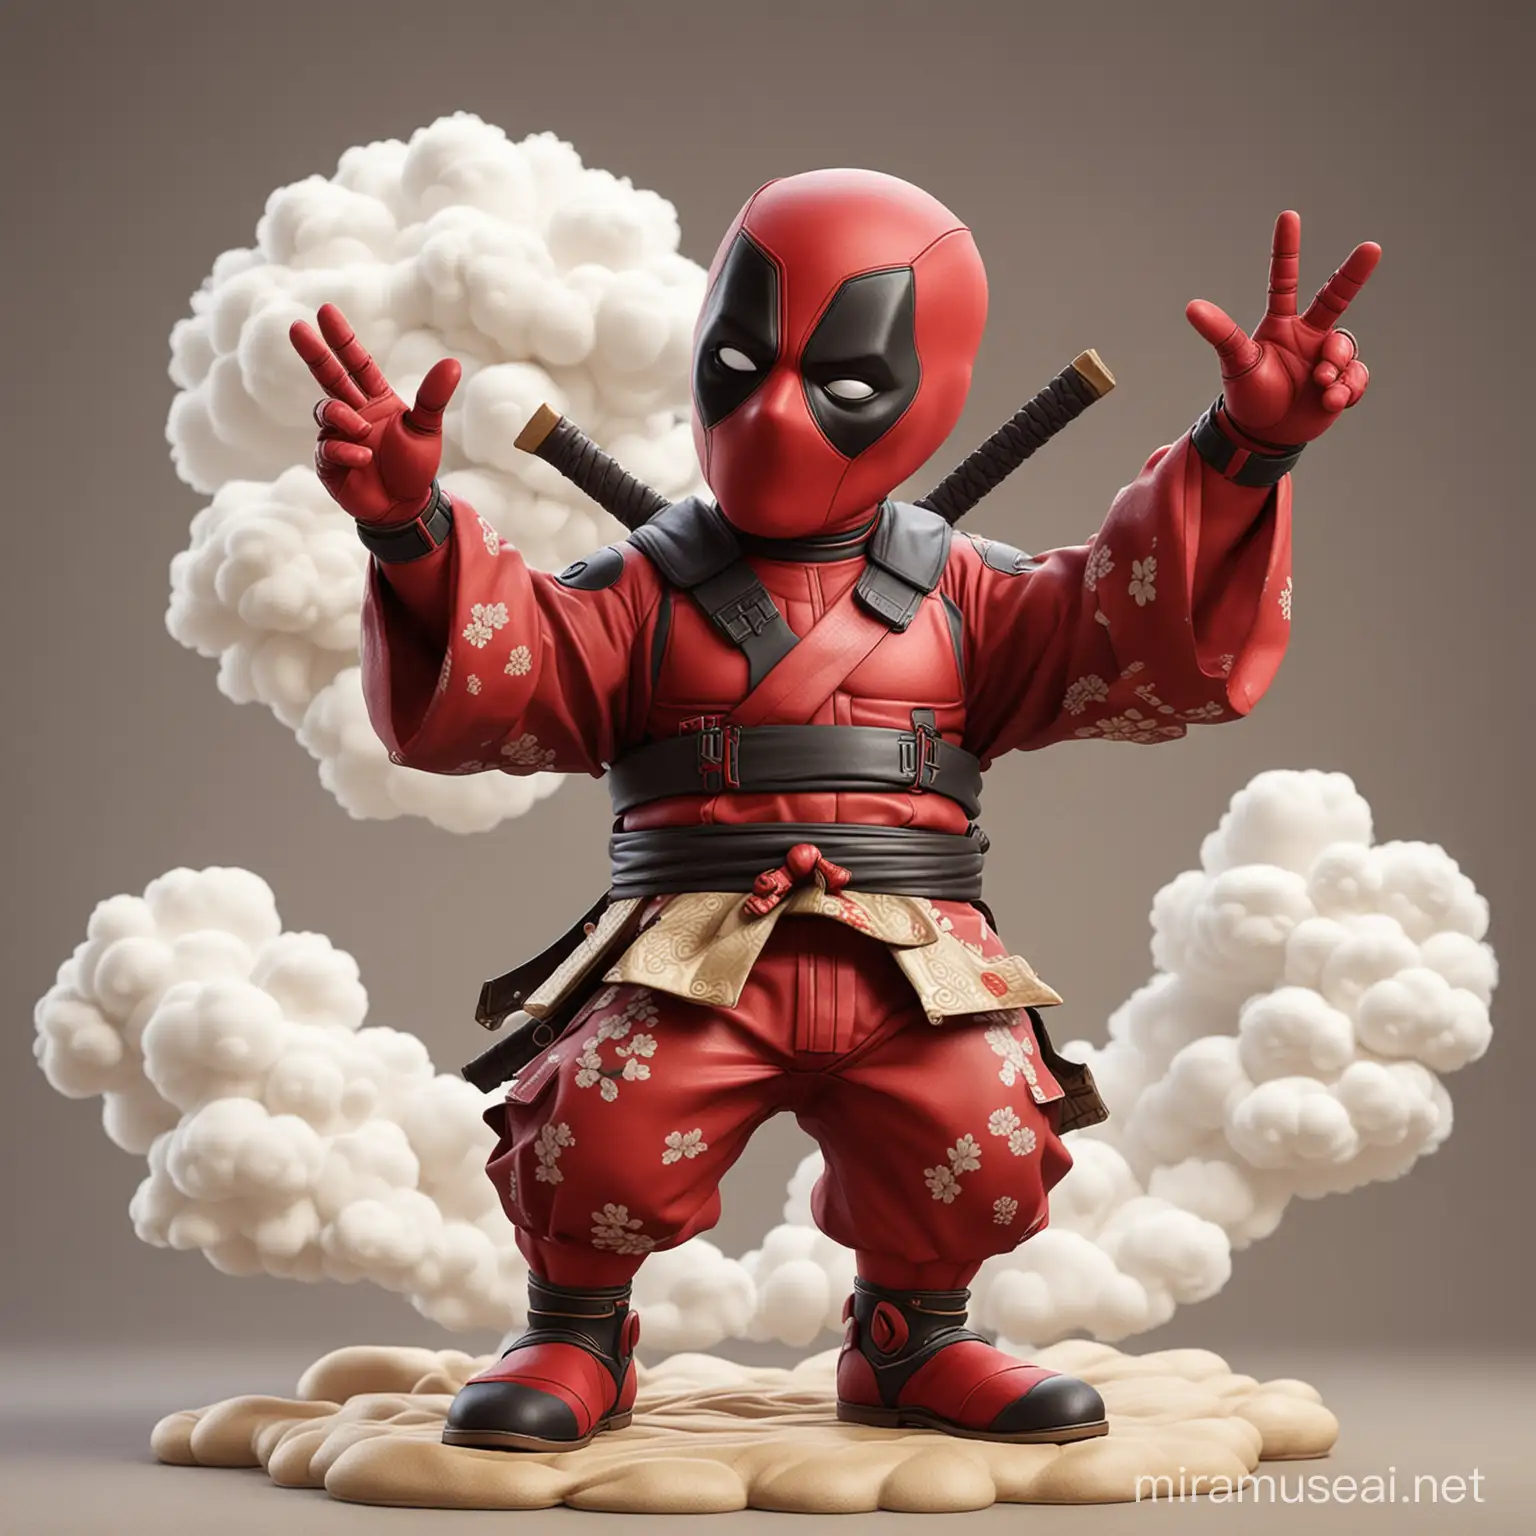 Whimsical Deadpool Caricature in Japanese Attire with Peace Sign